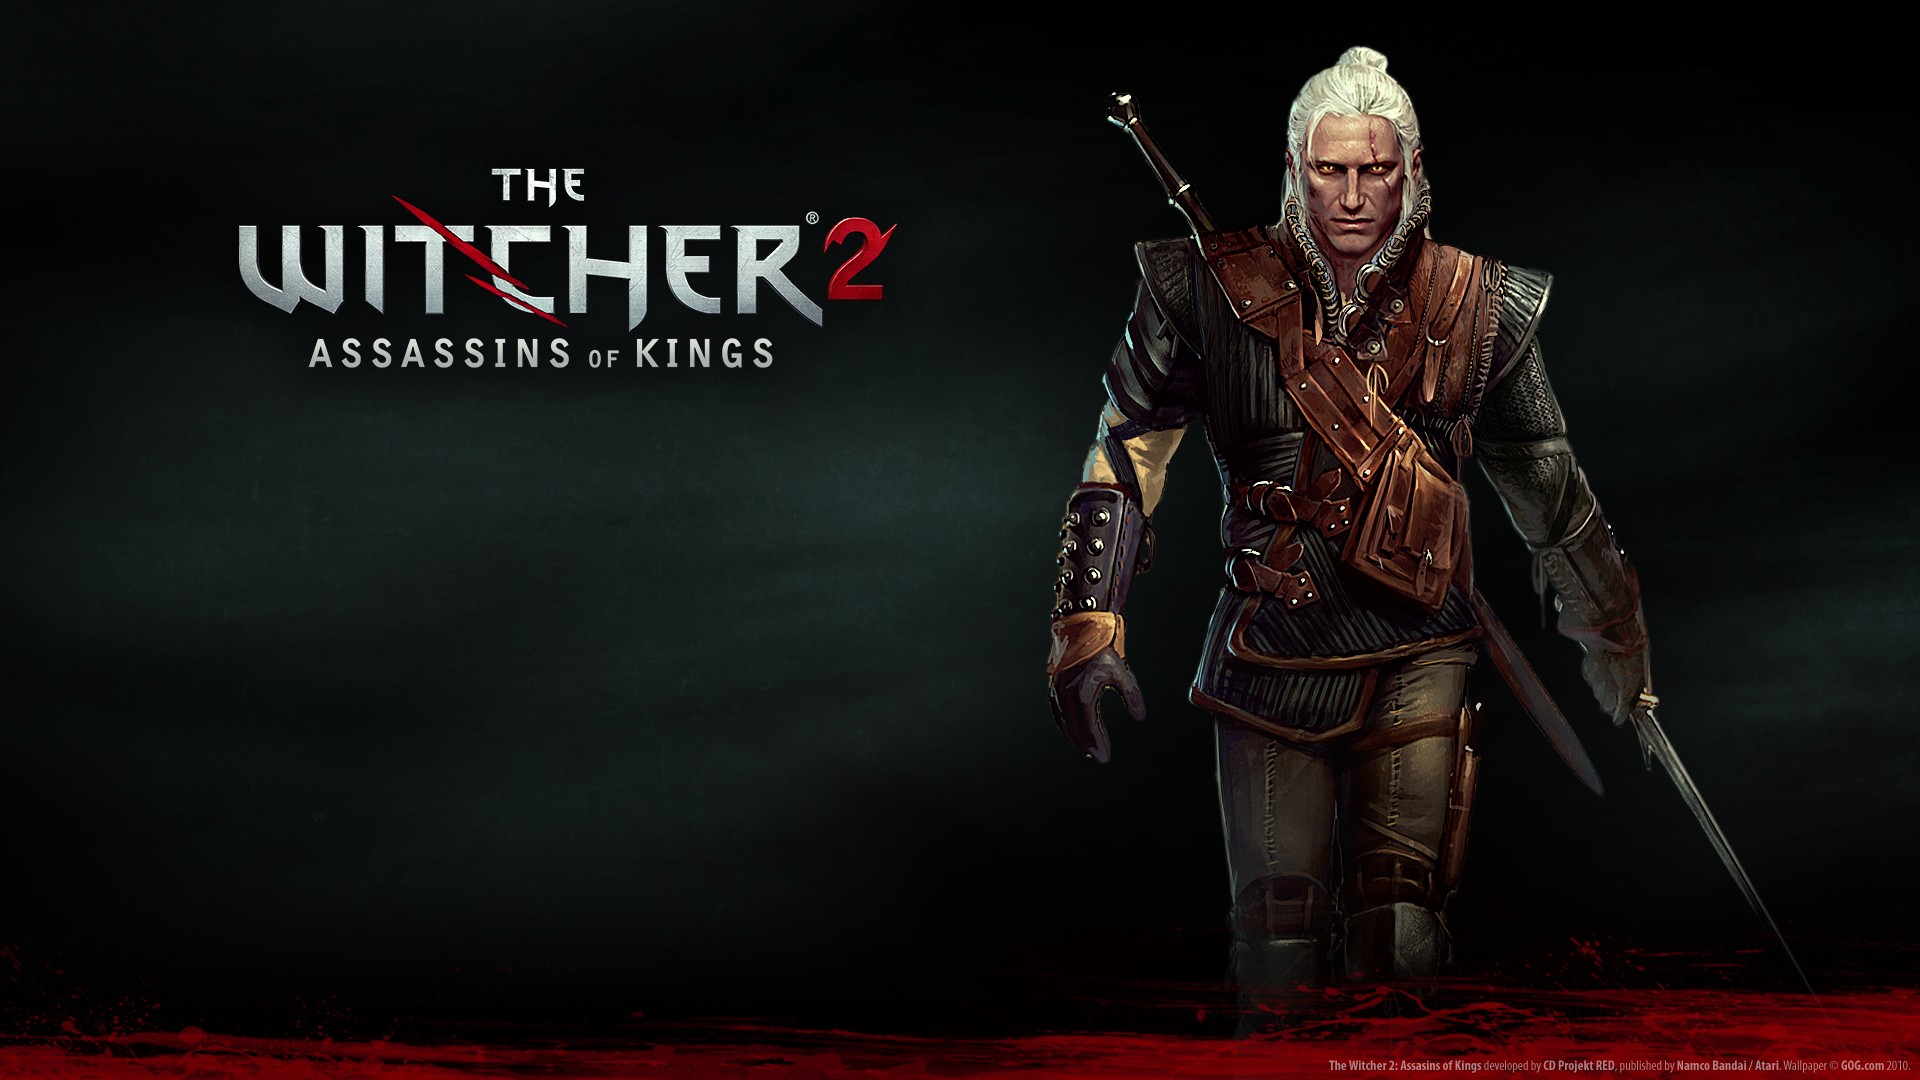 General 1920x1080 The Witcher 2: Assassins of Kings Geralt of Rivia video games PC gaming video game art CD Projekt RED